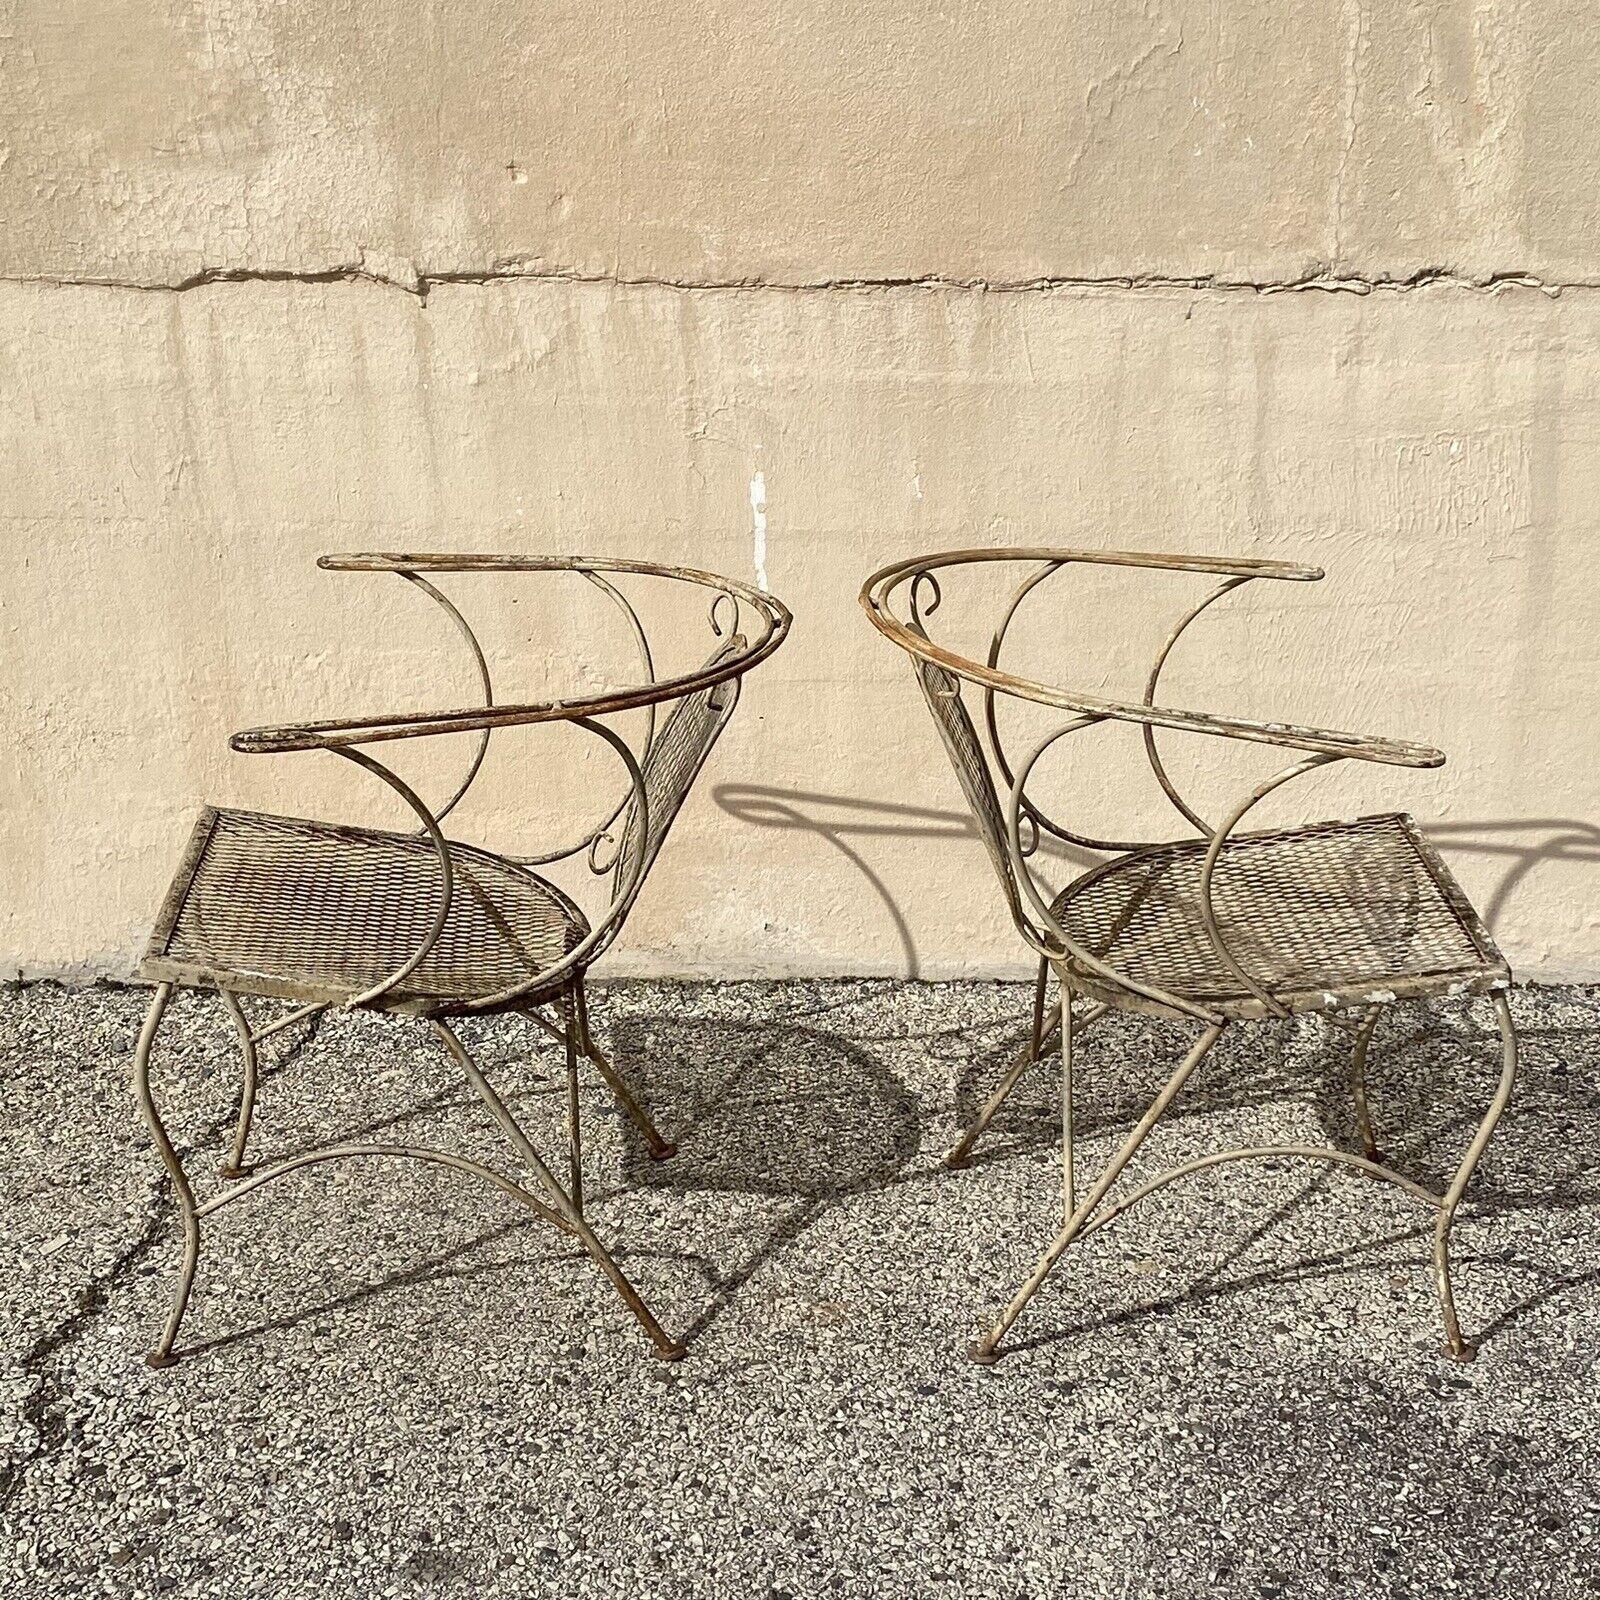 Vintage Mid Century Wrought Iron Barrel Back Garden Patio Dining Chairs - A Pair For Sale 7